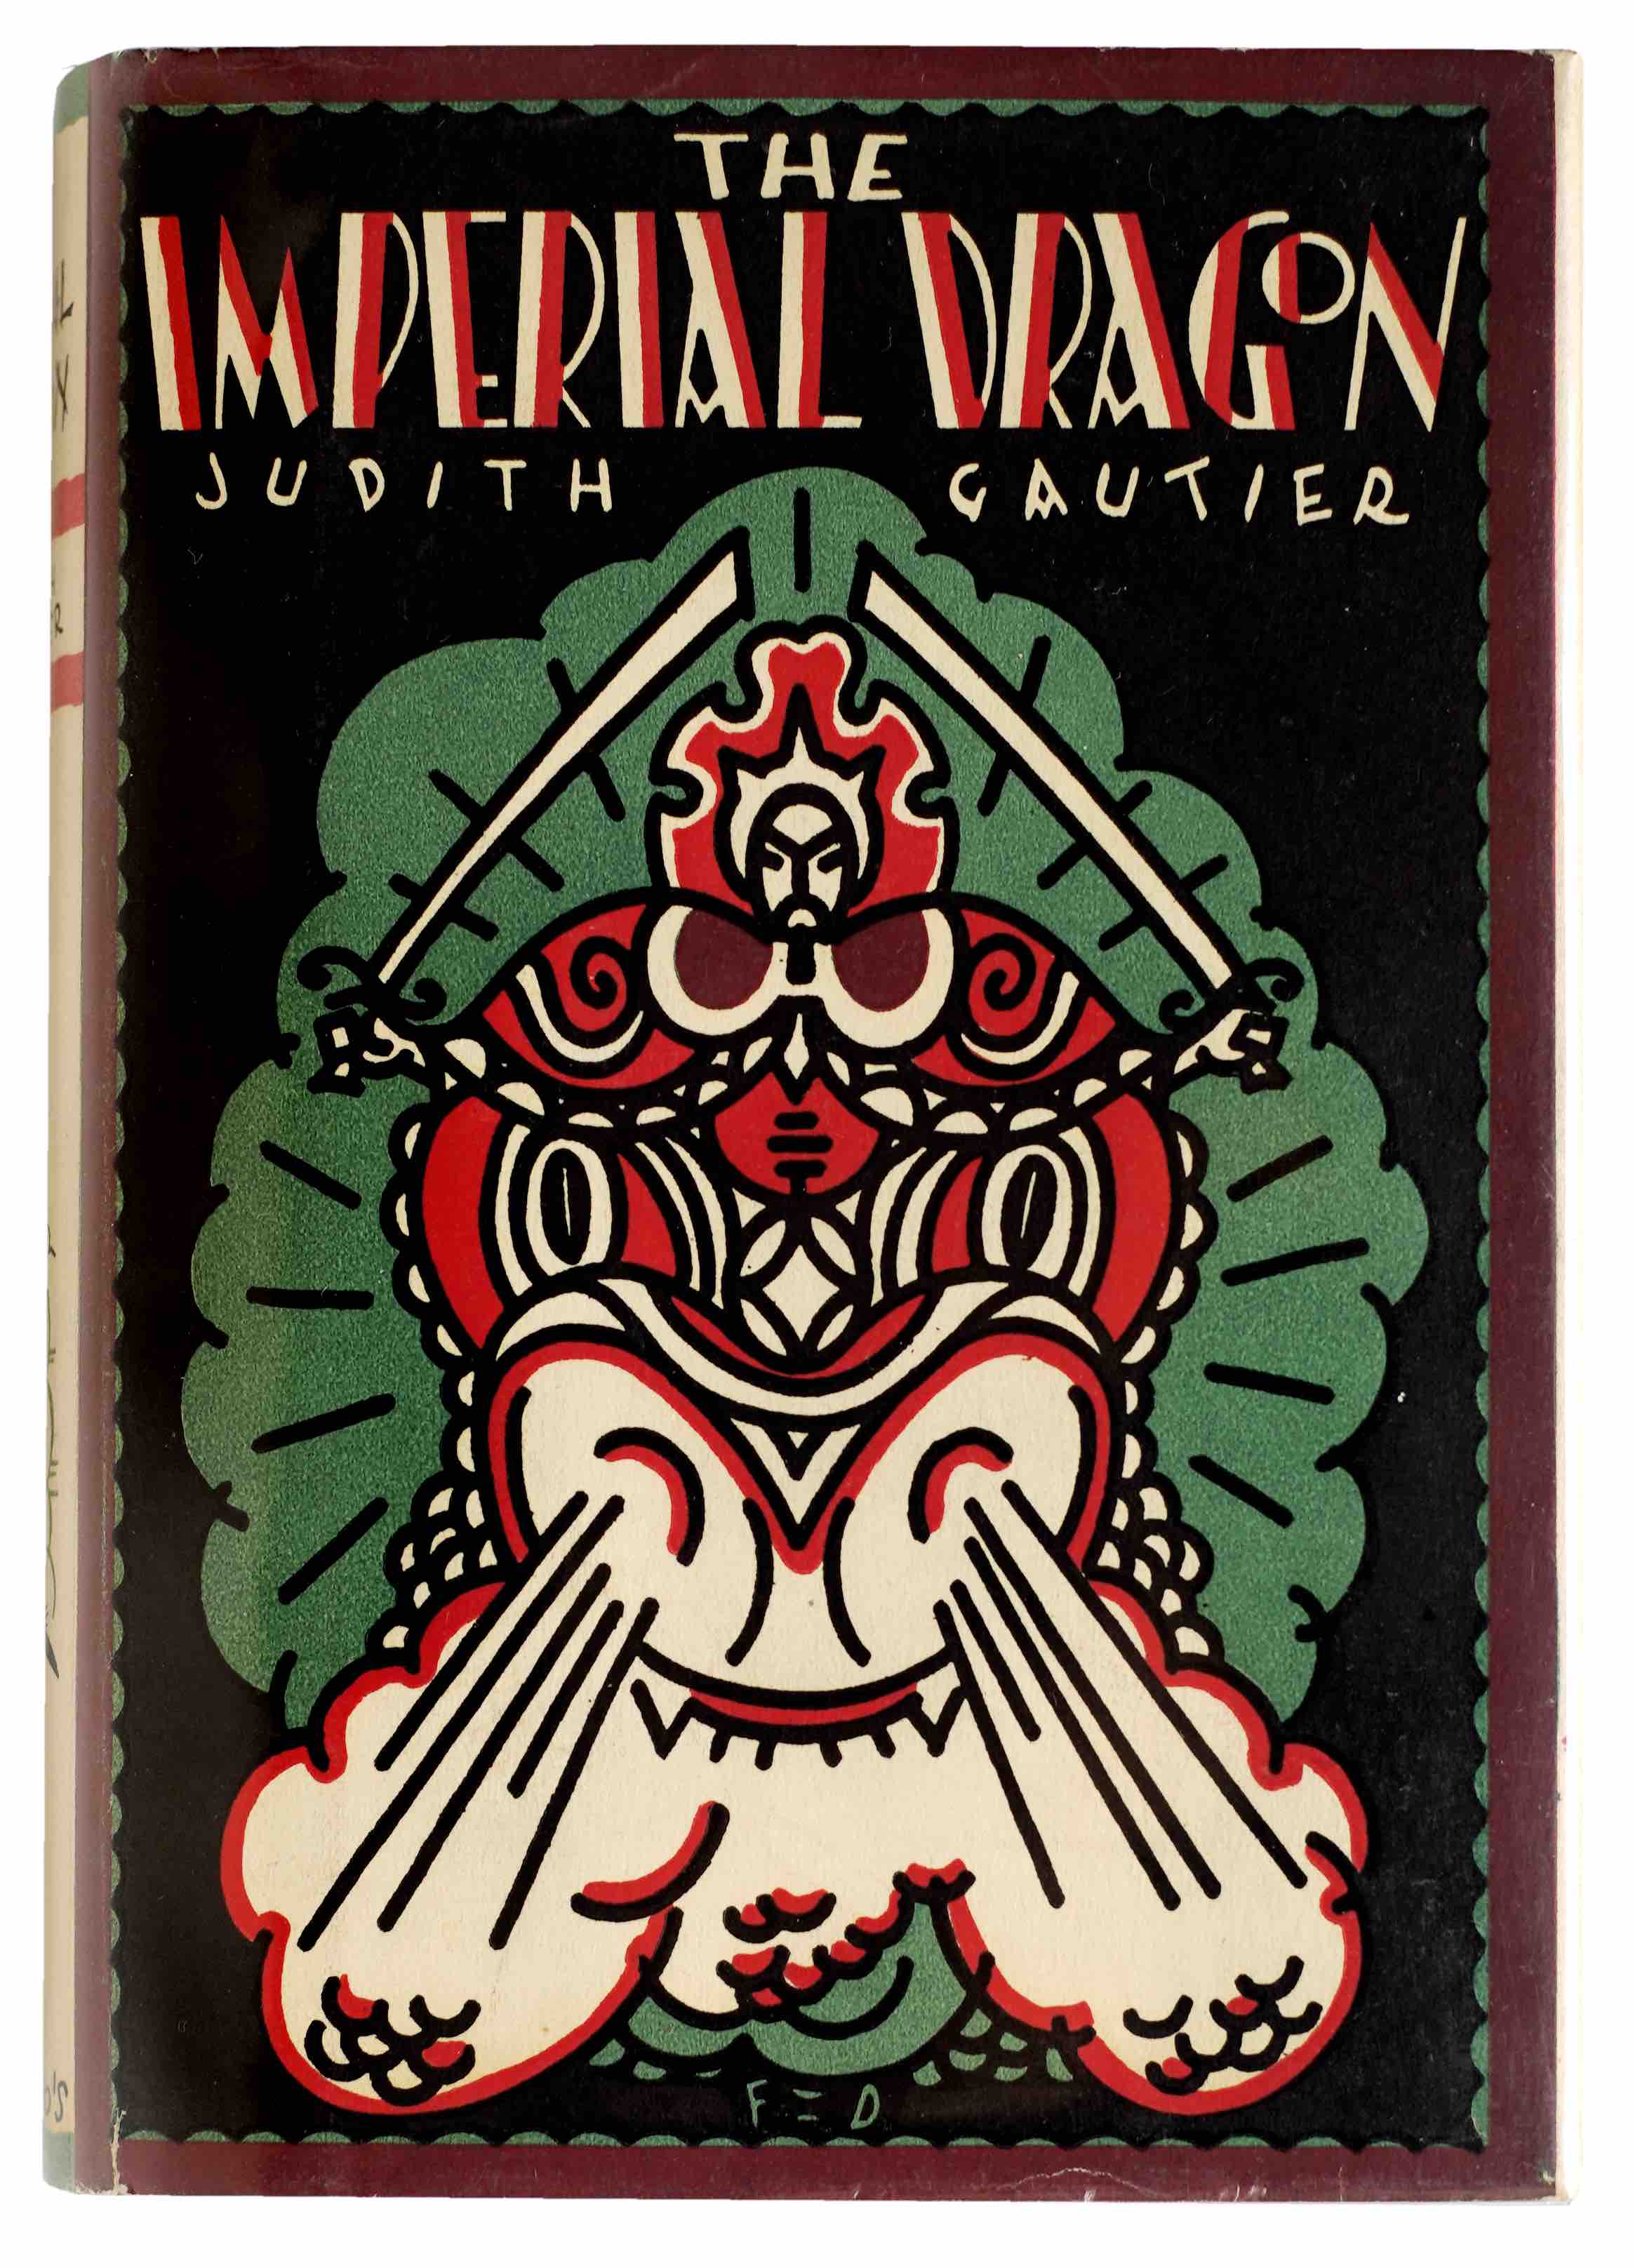 GAUTIER, JUDITH: - The Imperial Dragon. Translated by M.H. Bourchier. Brentano's Publisher (New York), Printed by Ebenezer Baylis & Son, The Trinity Press, Worcester,1928.